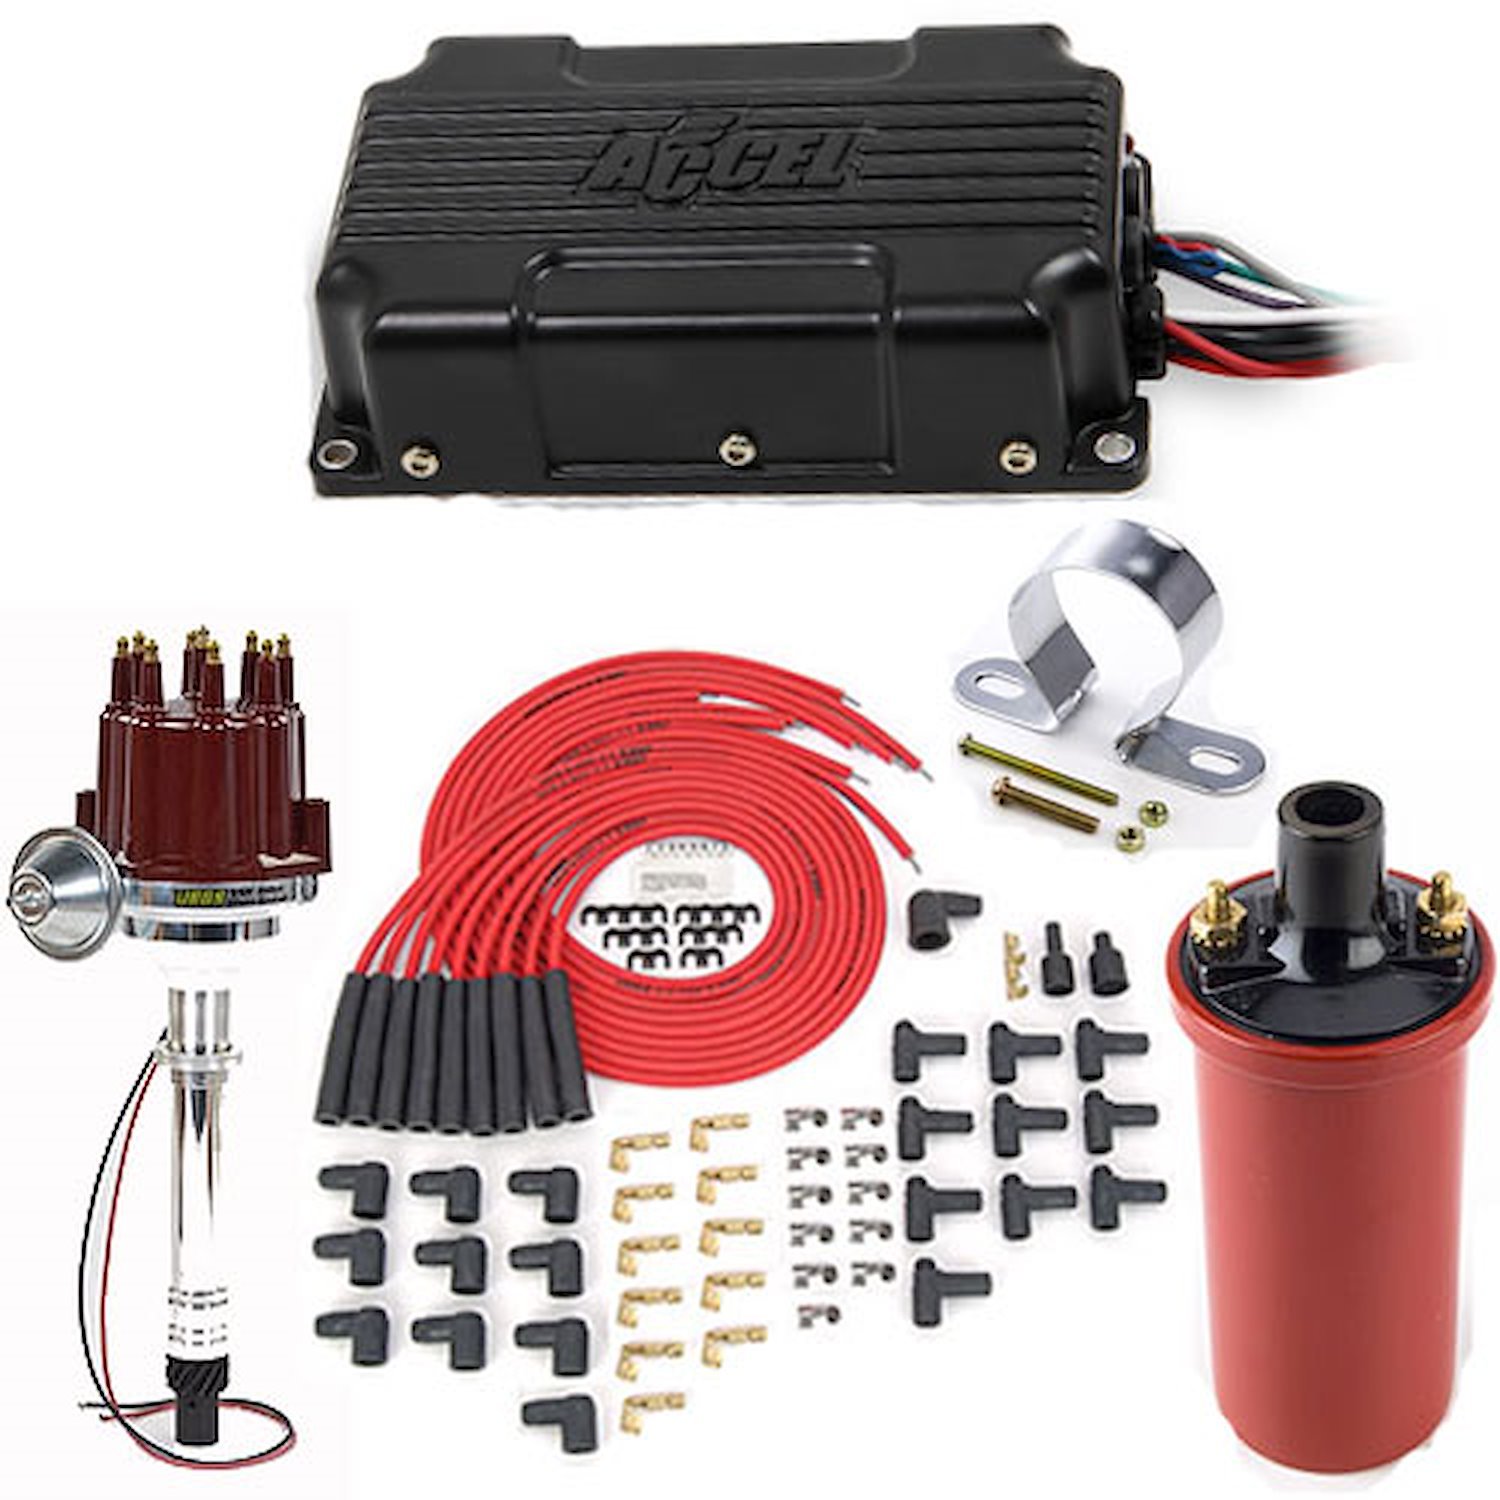 SuperBox Capacitive Discharge Ignition Kit